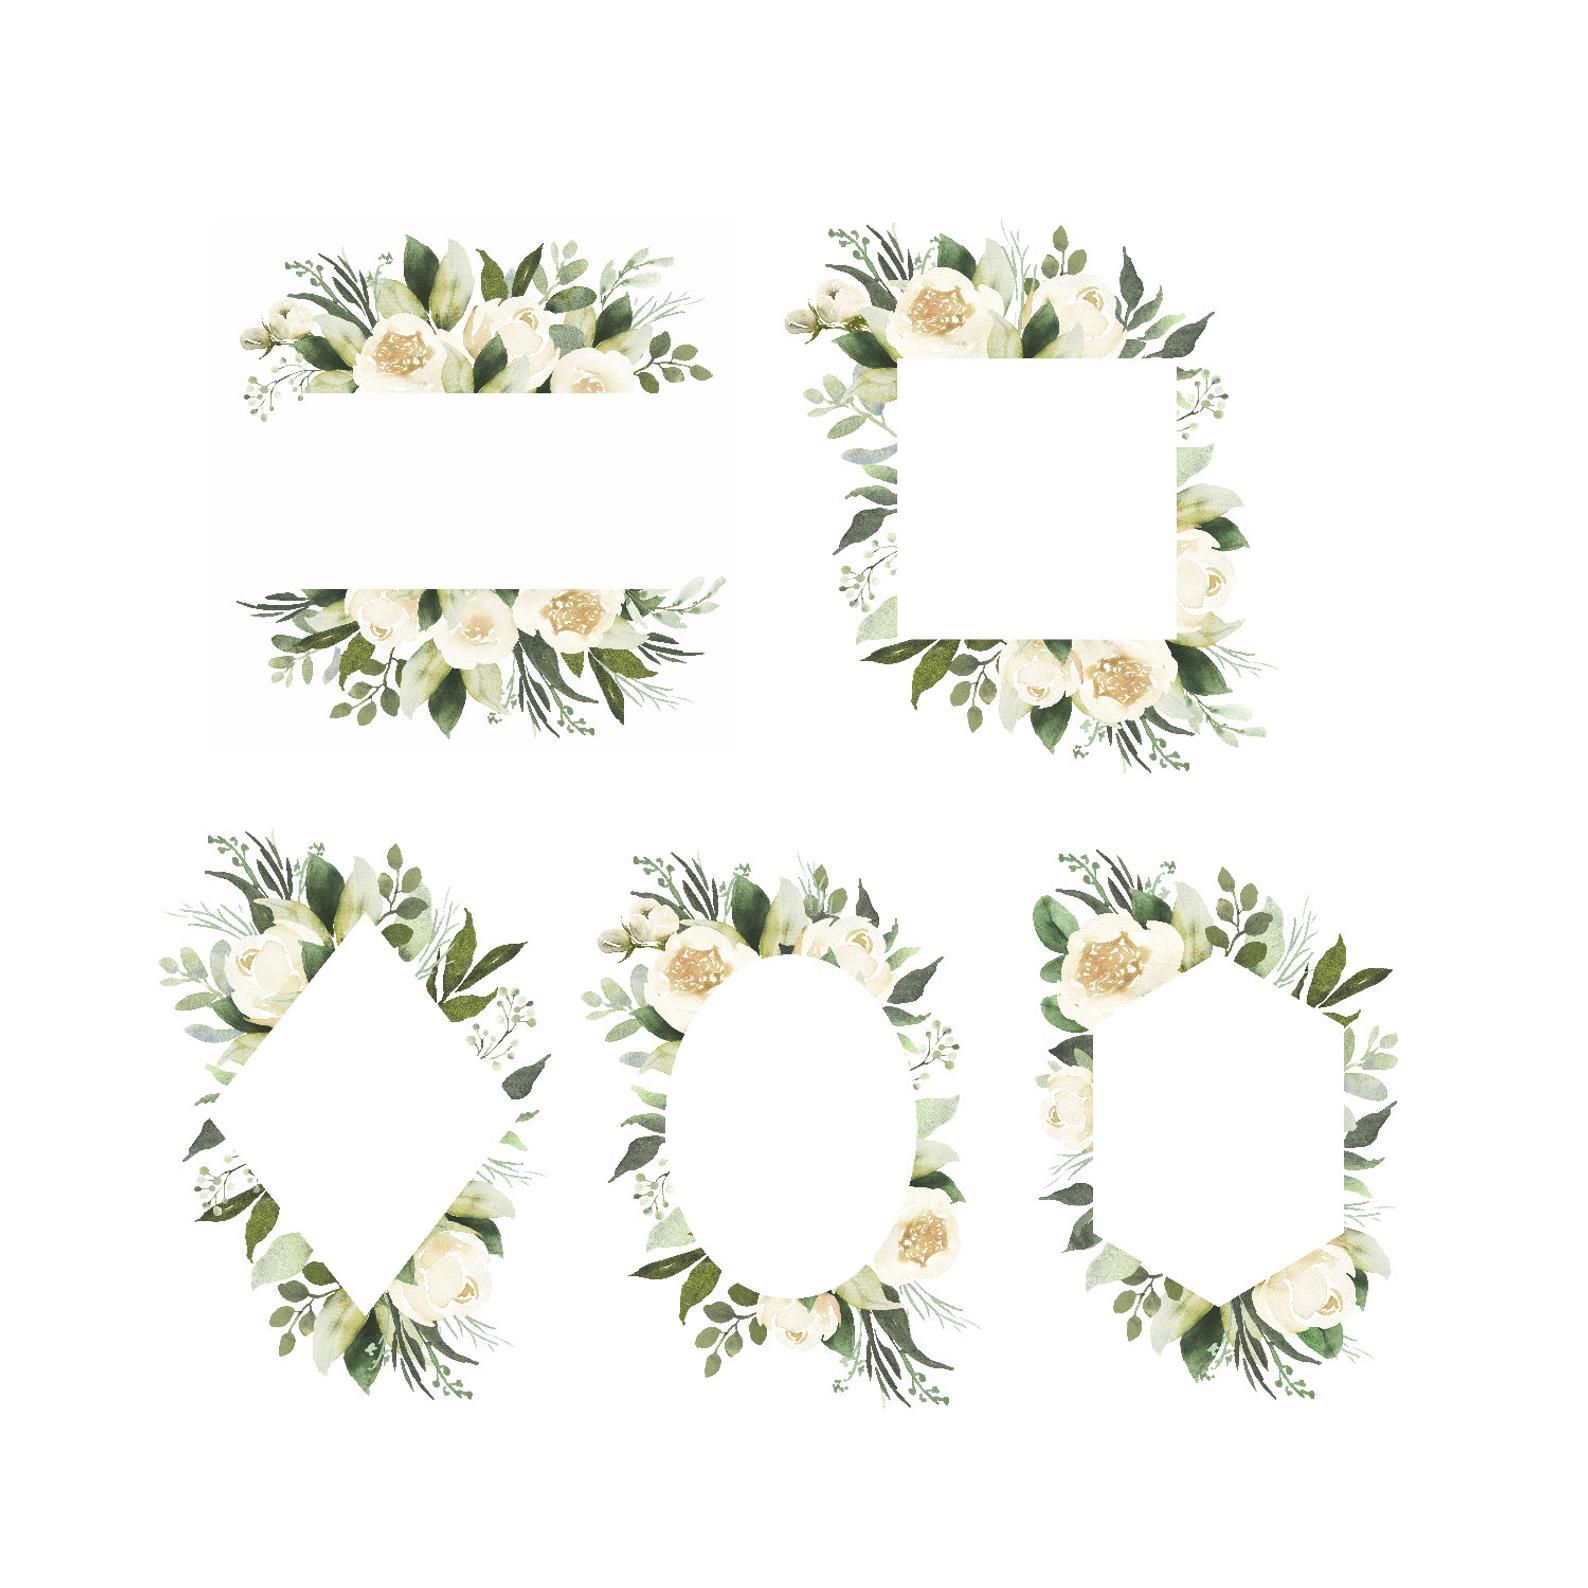 Adelaide watercolor clipart with white roses and eucalyptus.